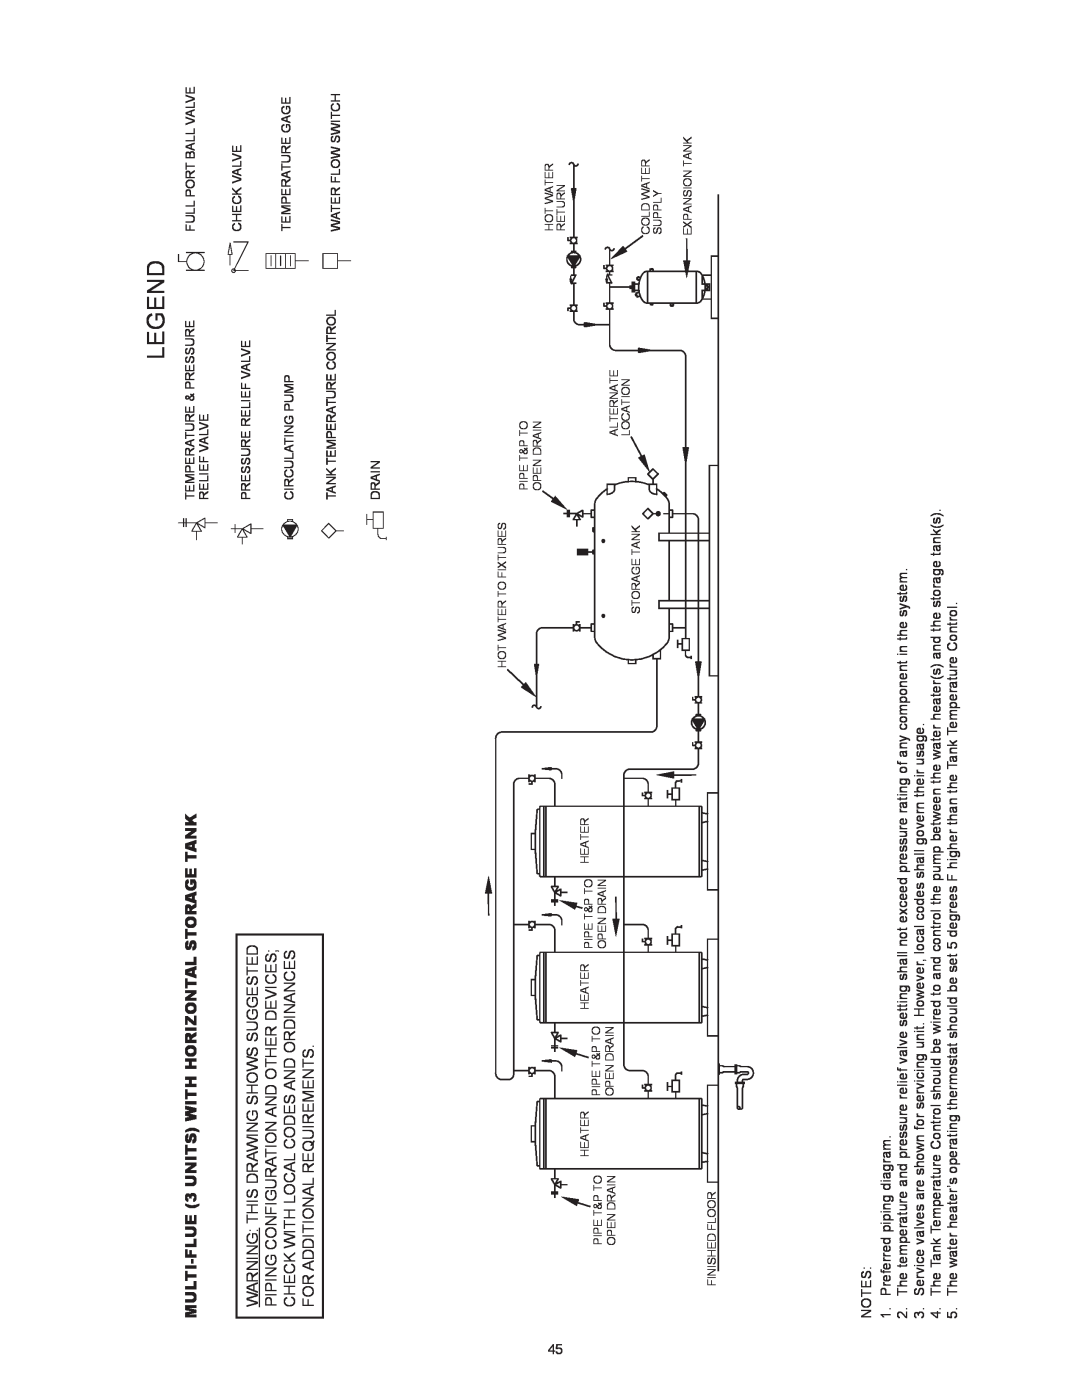 State Industries SBD85500PE MULTI-FLUE 3 UNITS WITH HORIZONTAL STORAGE TANK, Warning This Drawing Shows Suggested 